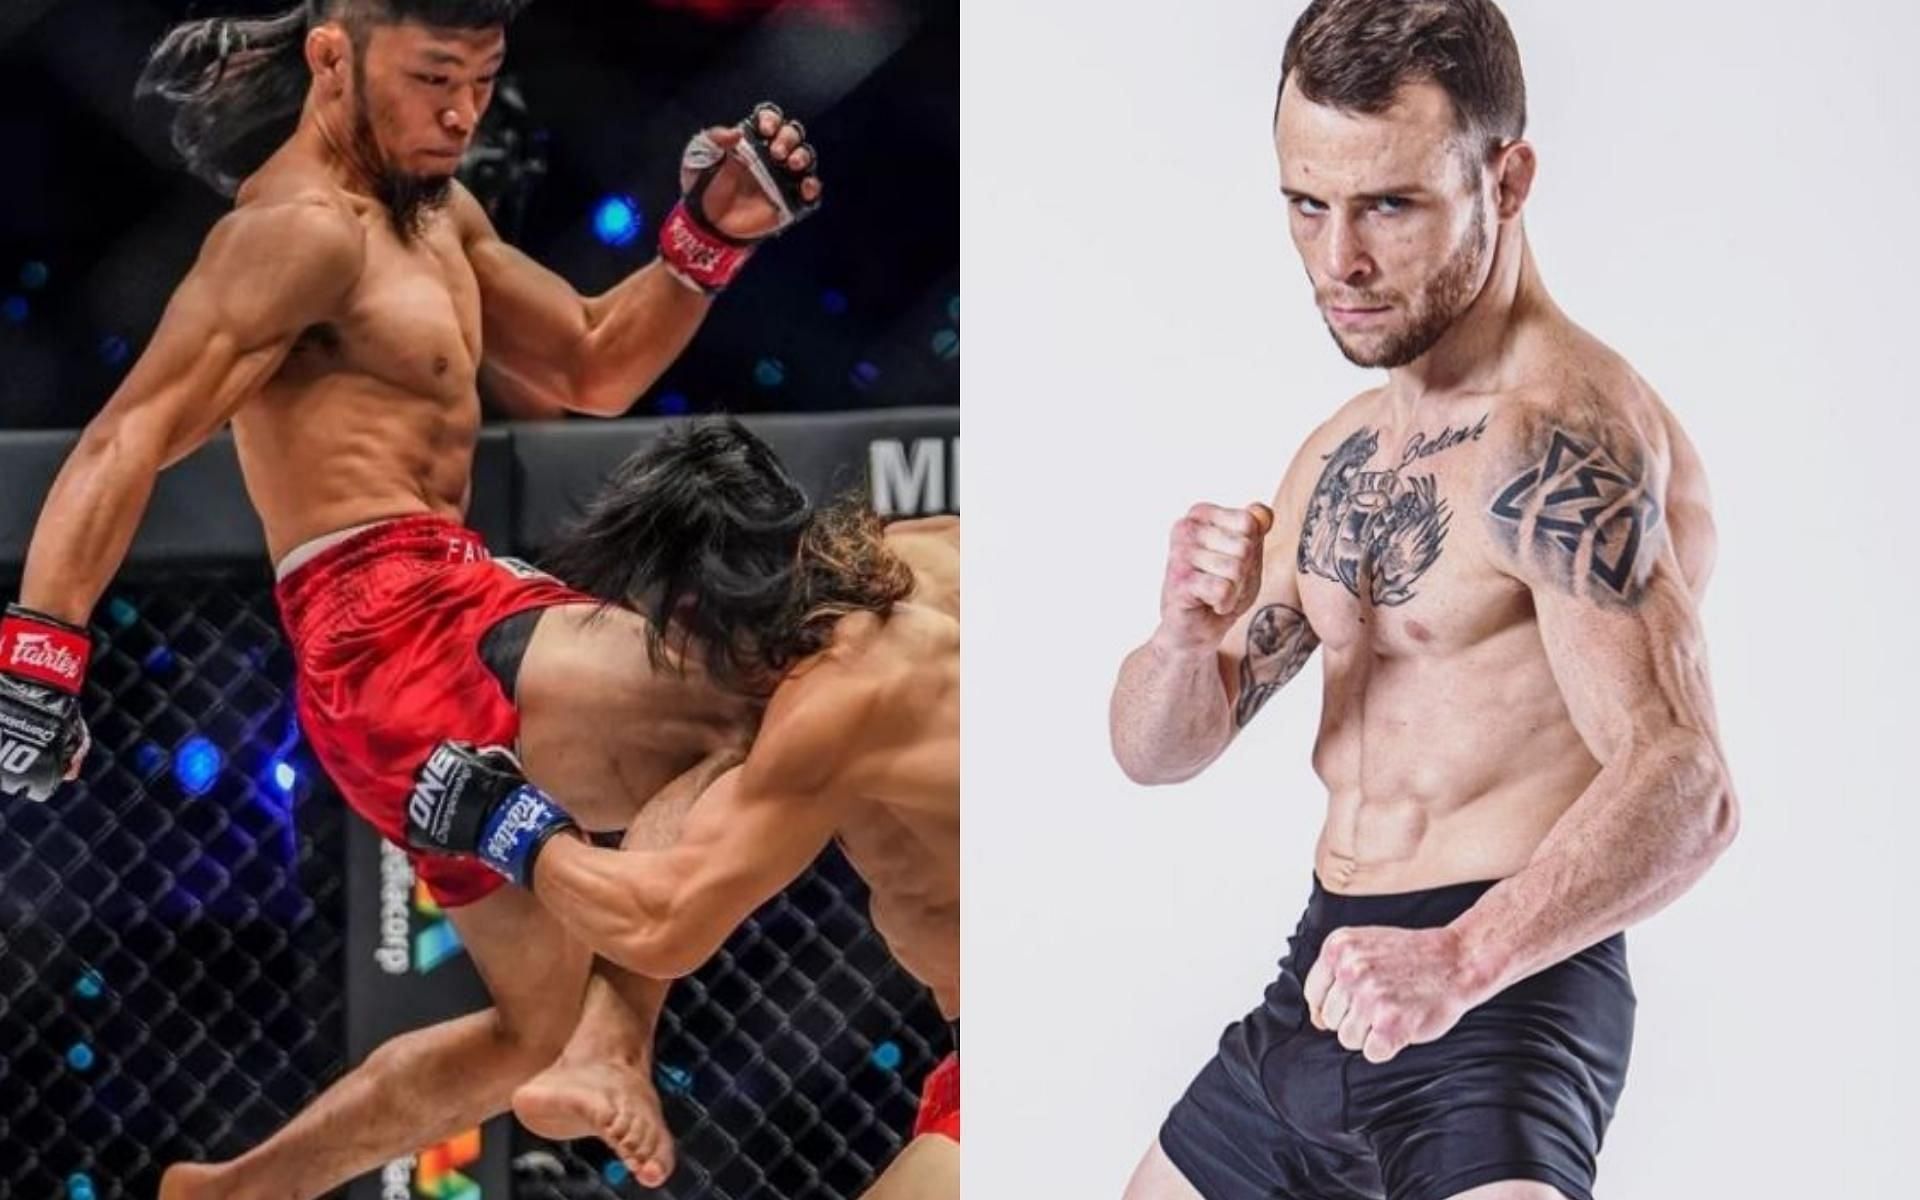 ONE Championship fighters Lito Adiwang (left) and Jarred Brooks (right) will face each other in the main event of ONE: NEXTGEN III on November 26. (Images credits: @litoadiwang and @the_monkeygod on Instagram)